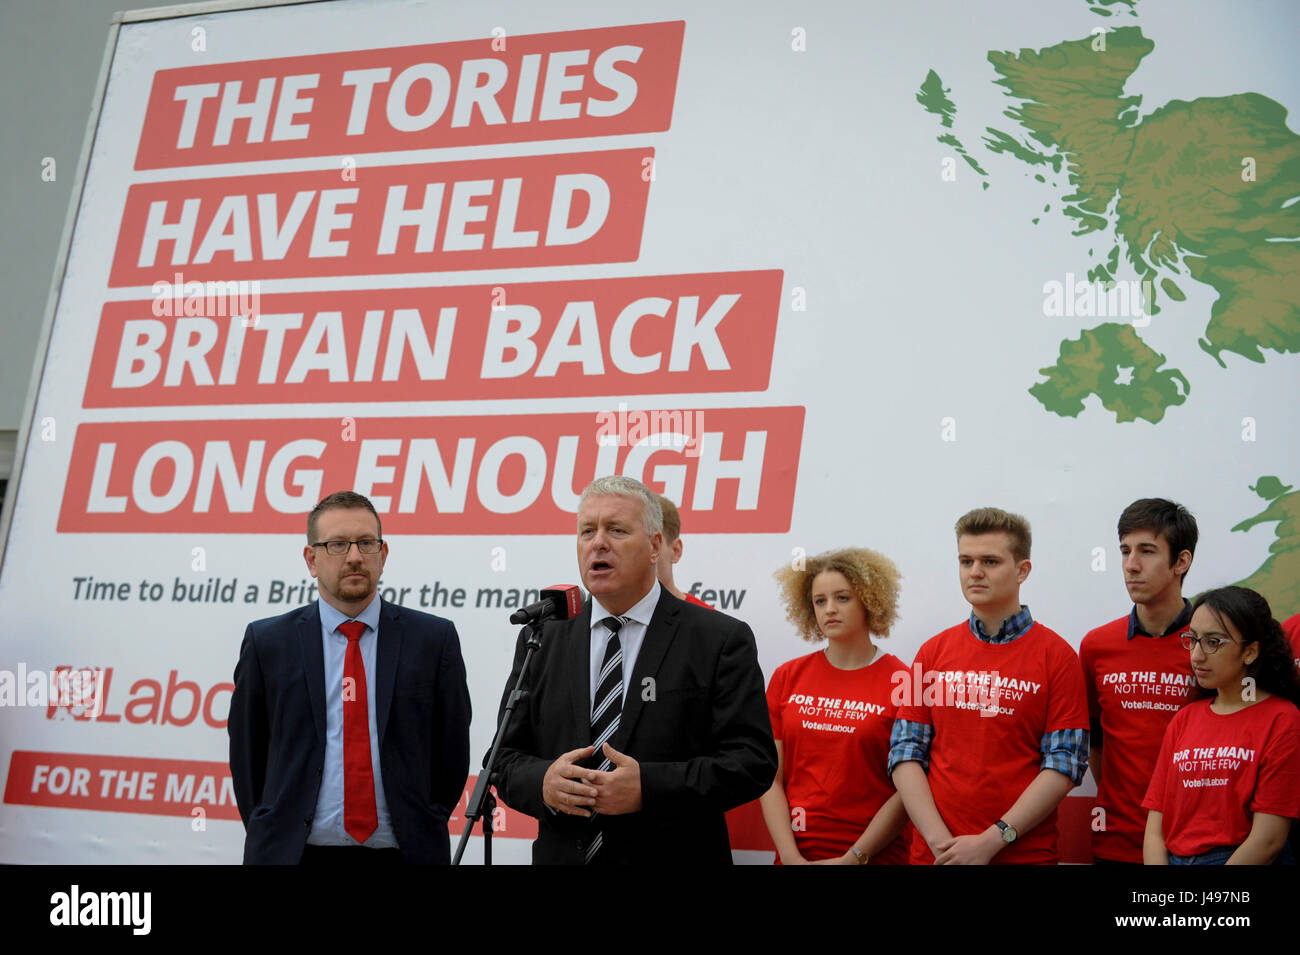 London, UK.  11 May 2017.  (L to R) Andrew Gwynne MP, National Elections and Campaigns Co-ordinator and Ian Lavery MP, National Elections and Campaigns Co-ordinator, unveil a new campaign poster for Labour’s General Election campaign at a press call on the South Bank.  Jeremy Corbyn, Leader of the Labour Party, was scheduled to speak, but was called away on other business.   Credit: Stephen Chung / Alamy Live News Stock Photo